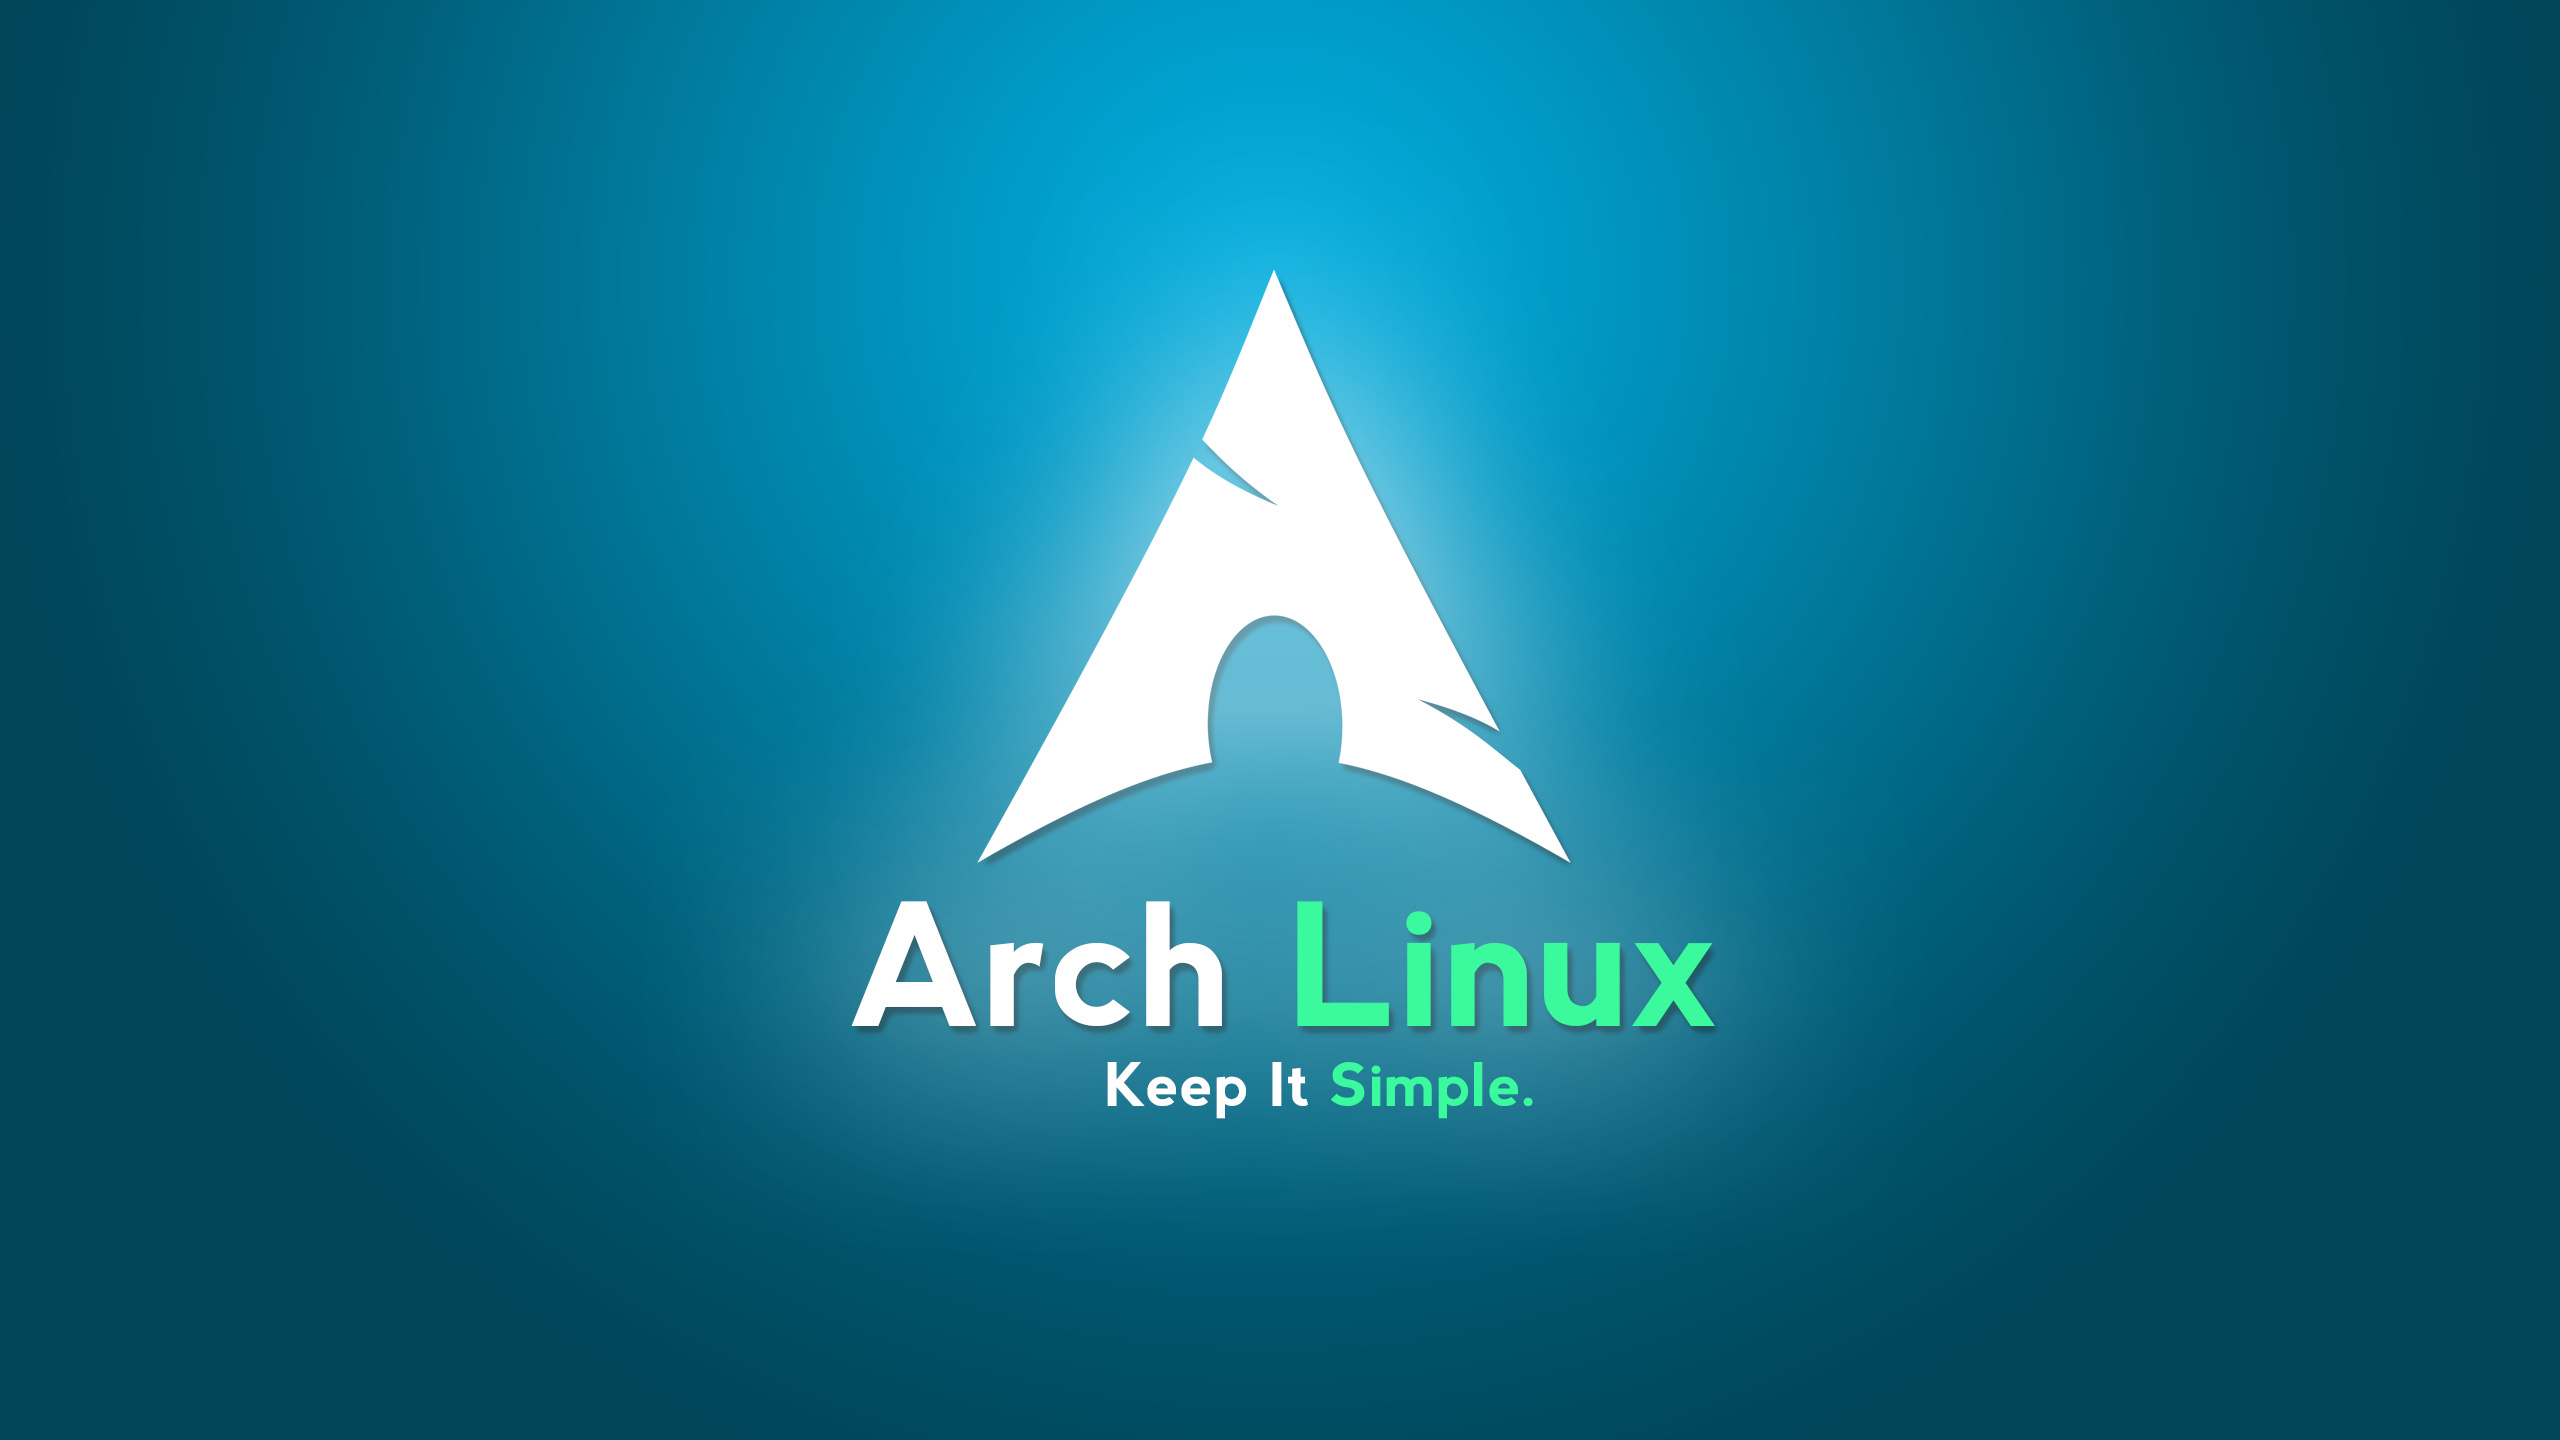 Arch linux 64 bit iso download free